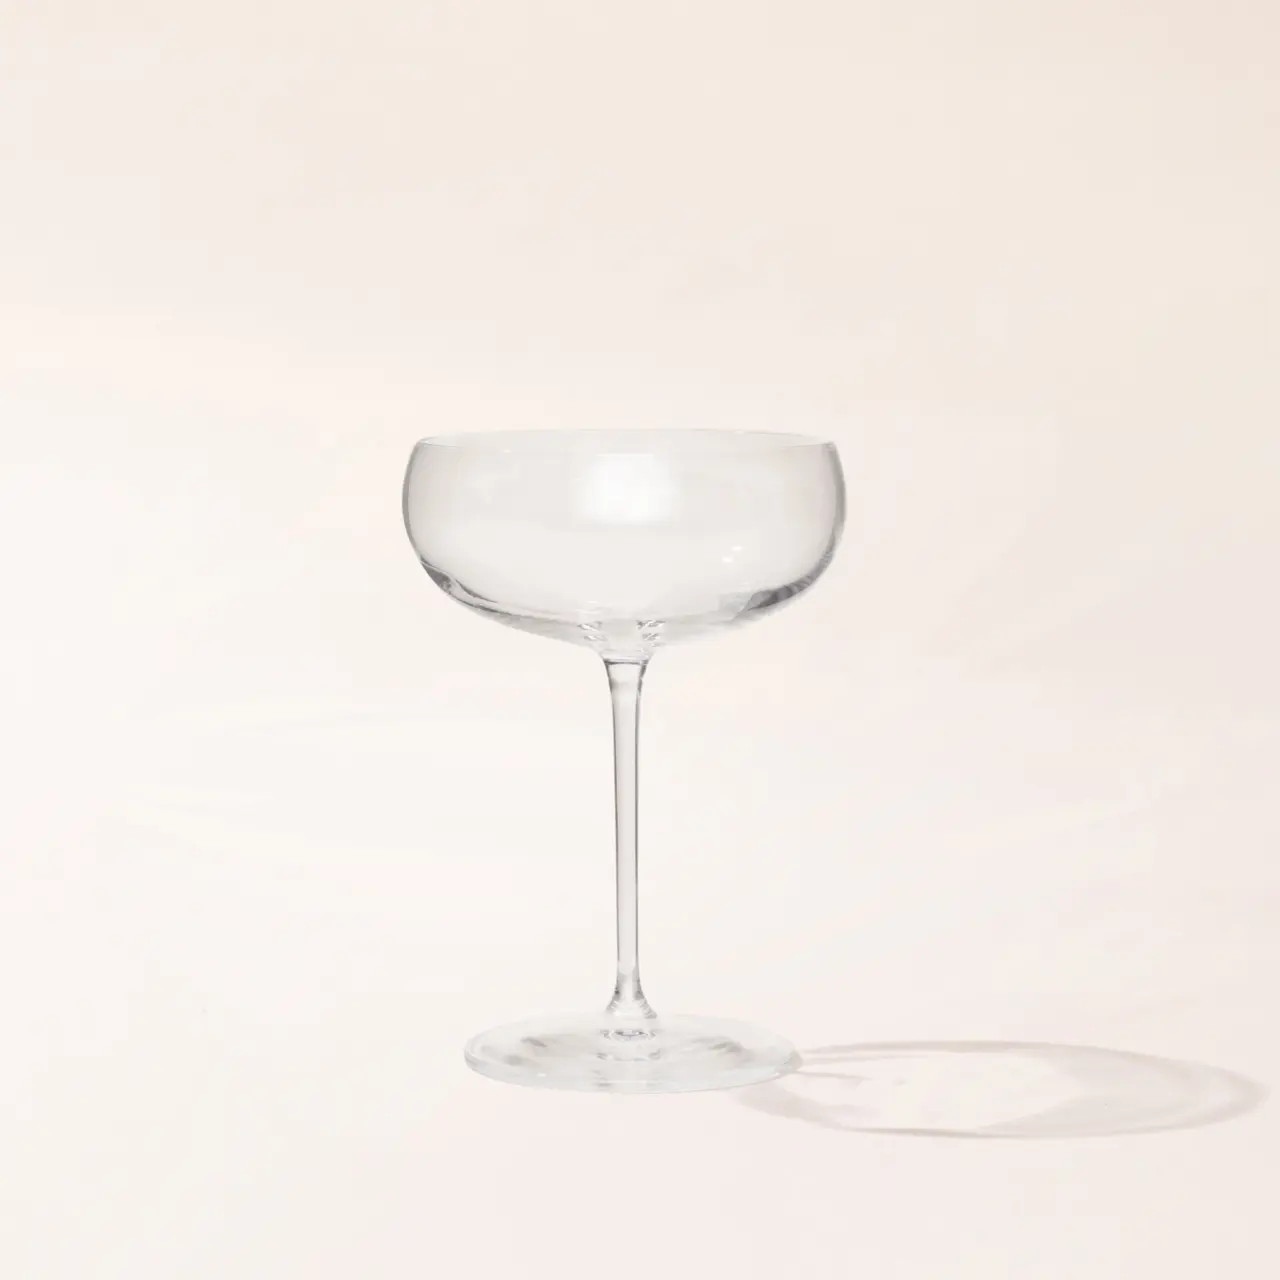 An empty glass with a stem on a cream background casting a soft shadow.